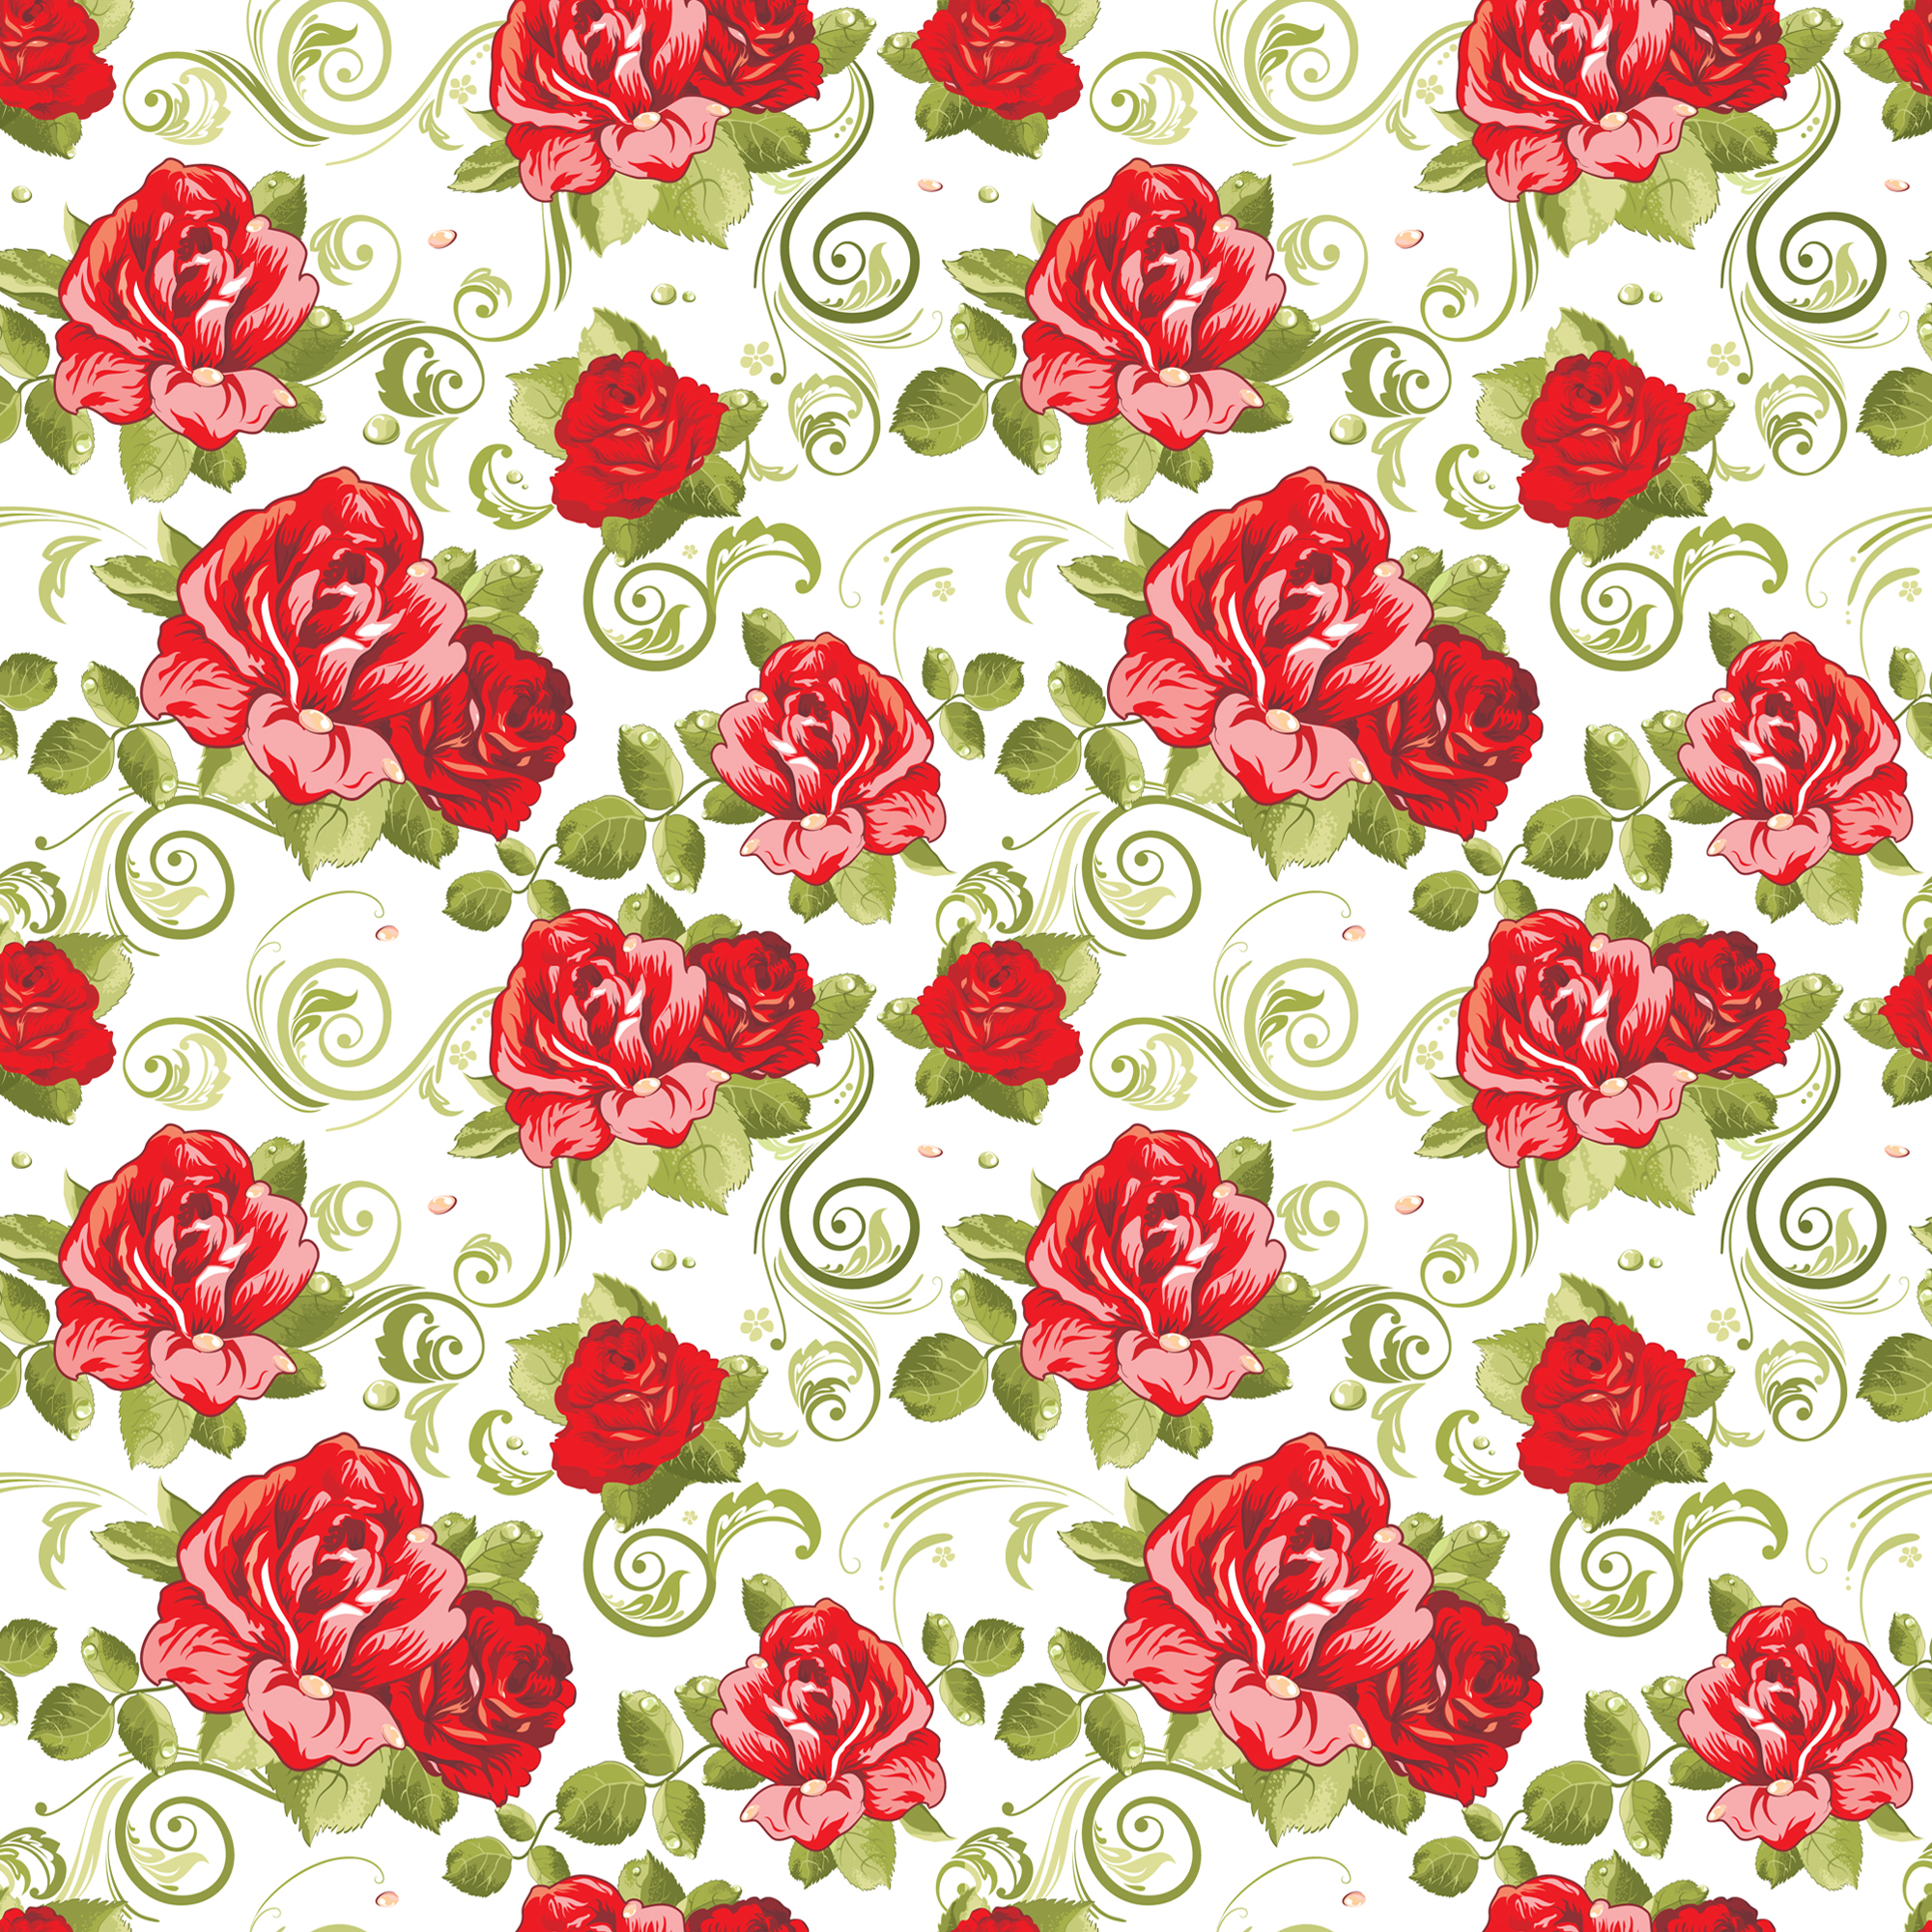 Free HD background, pictures, roses, flowers, patterns